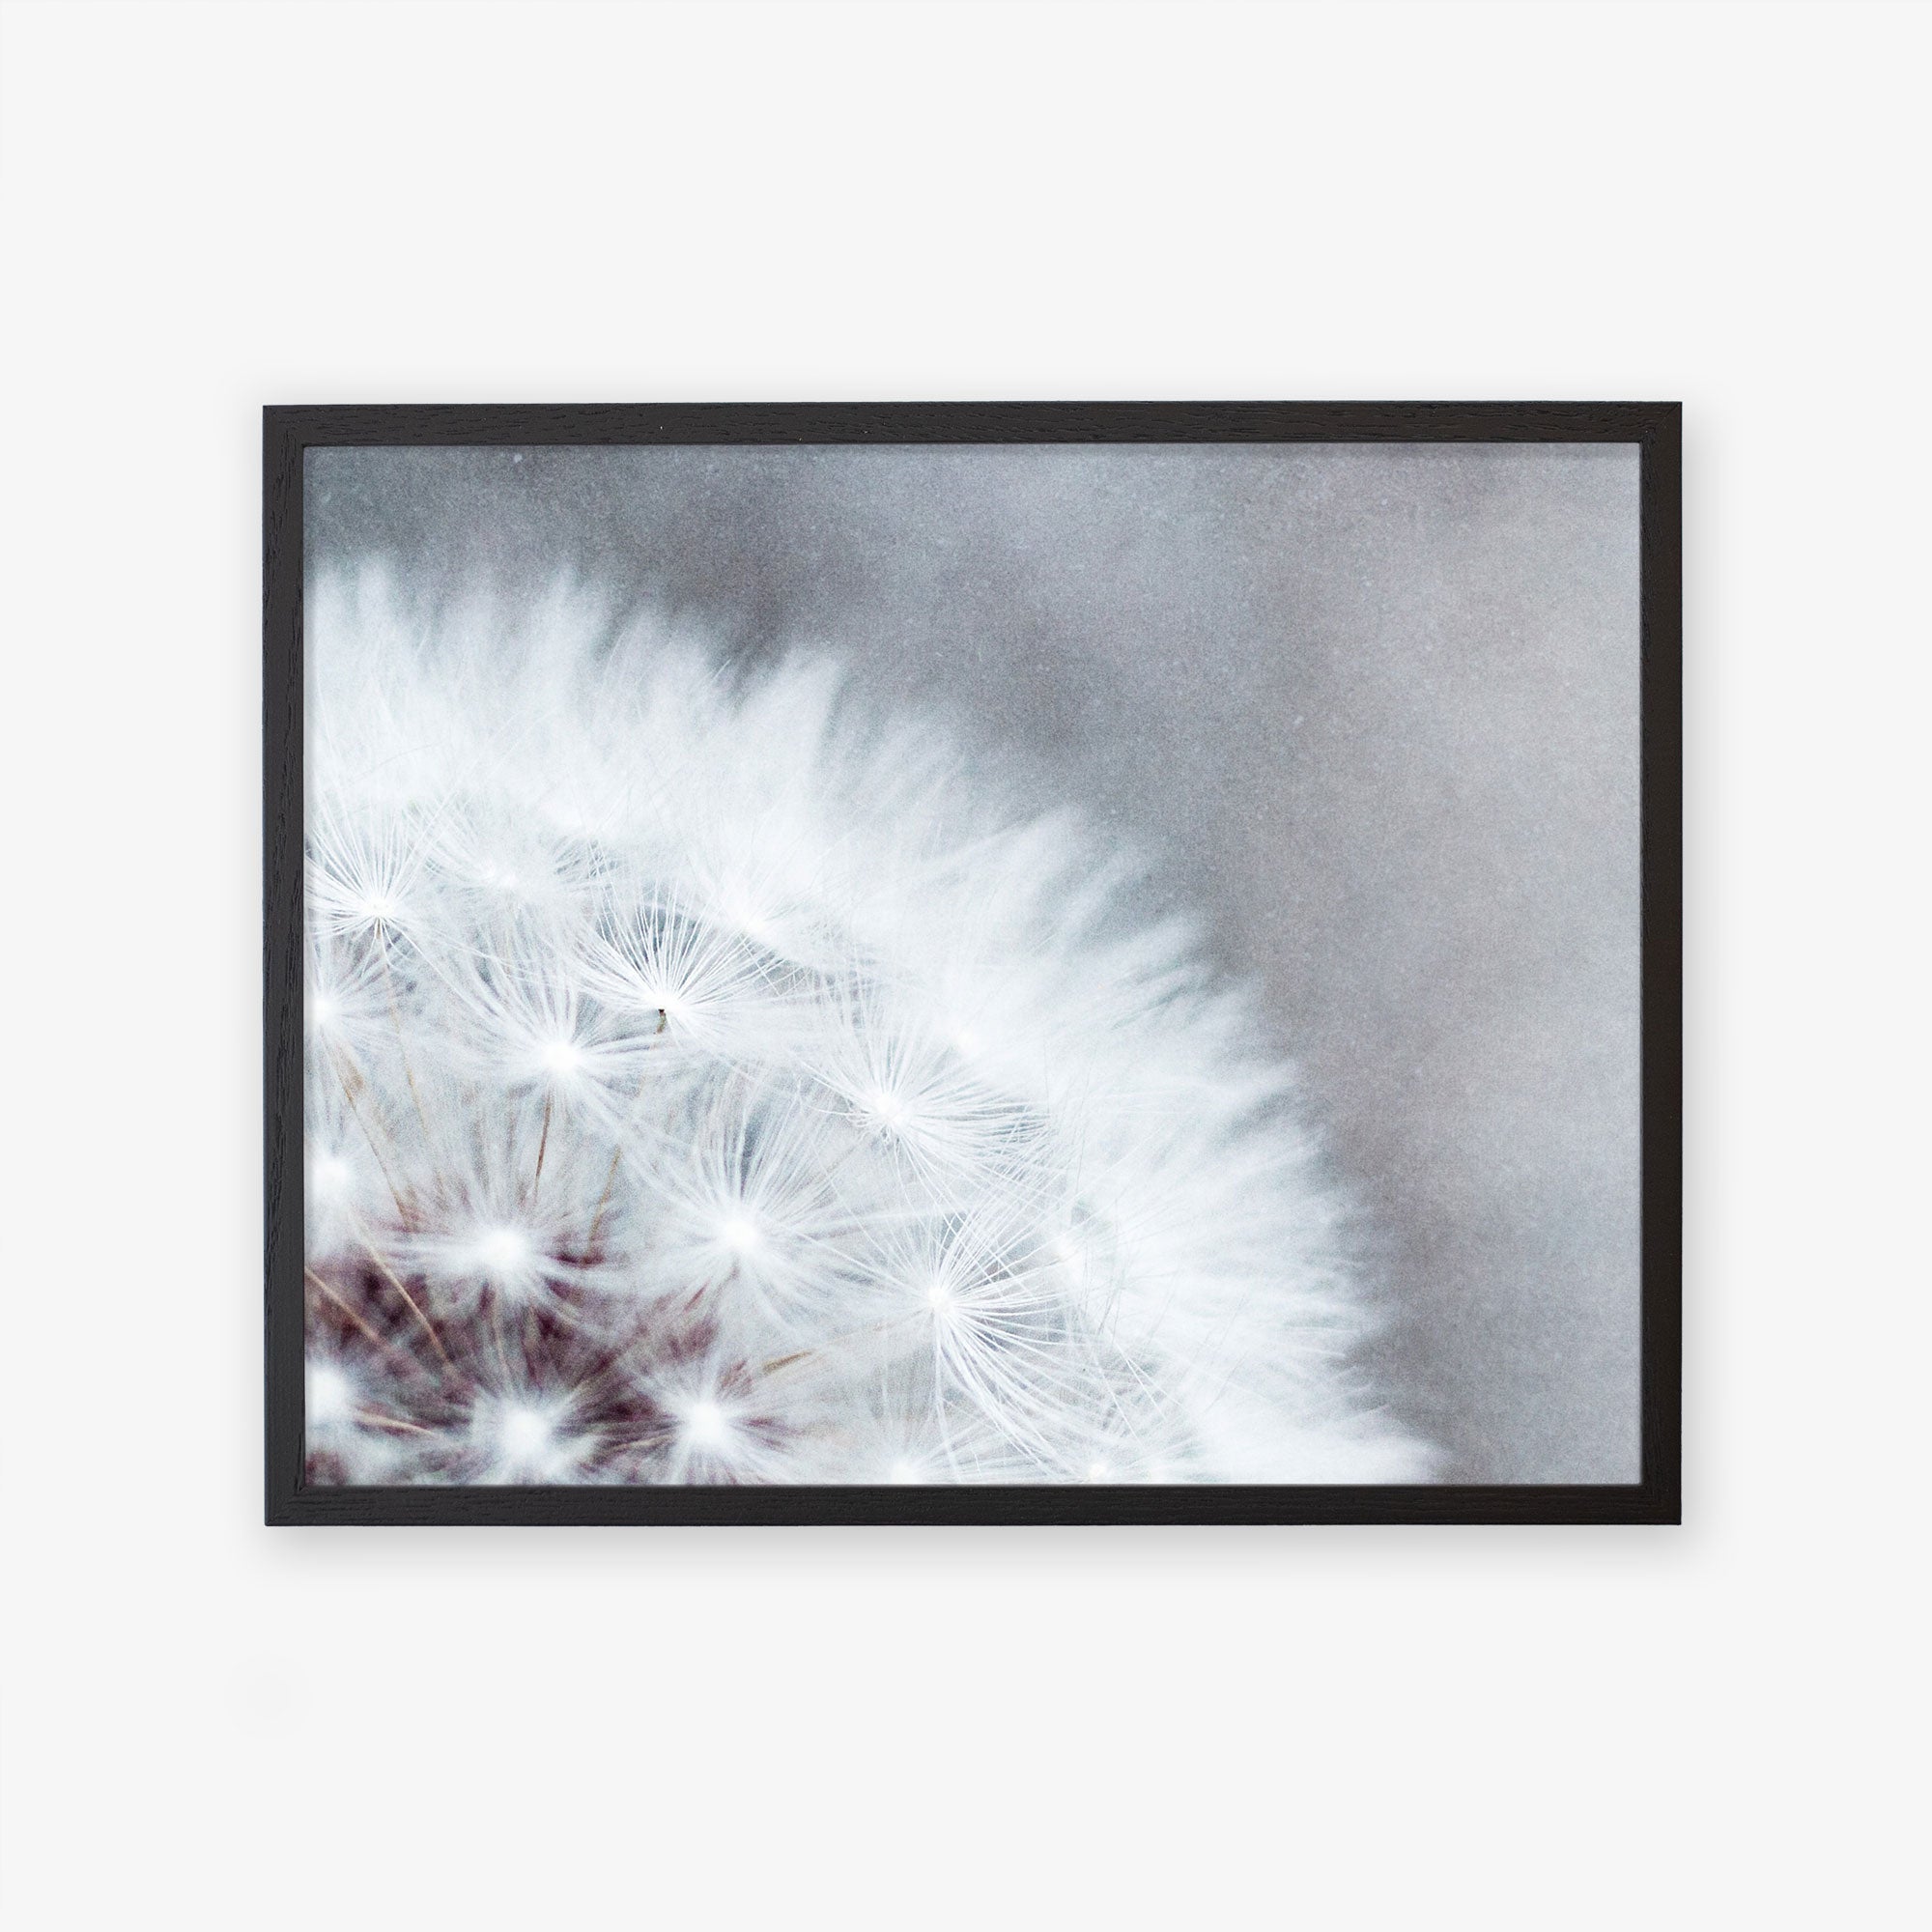 A framed photograph of a close-up view of a dandelion tuft, capturing the delicate details of the seeds against a soft, blurry background called Grey Botanical Print, &#39;Dandelion Queen&#39; by Offley Green.